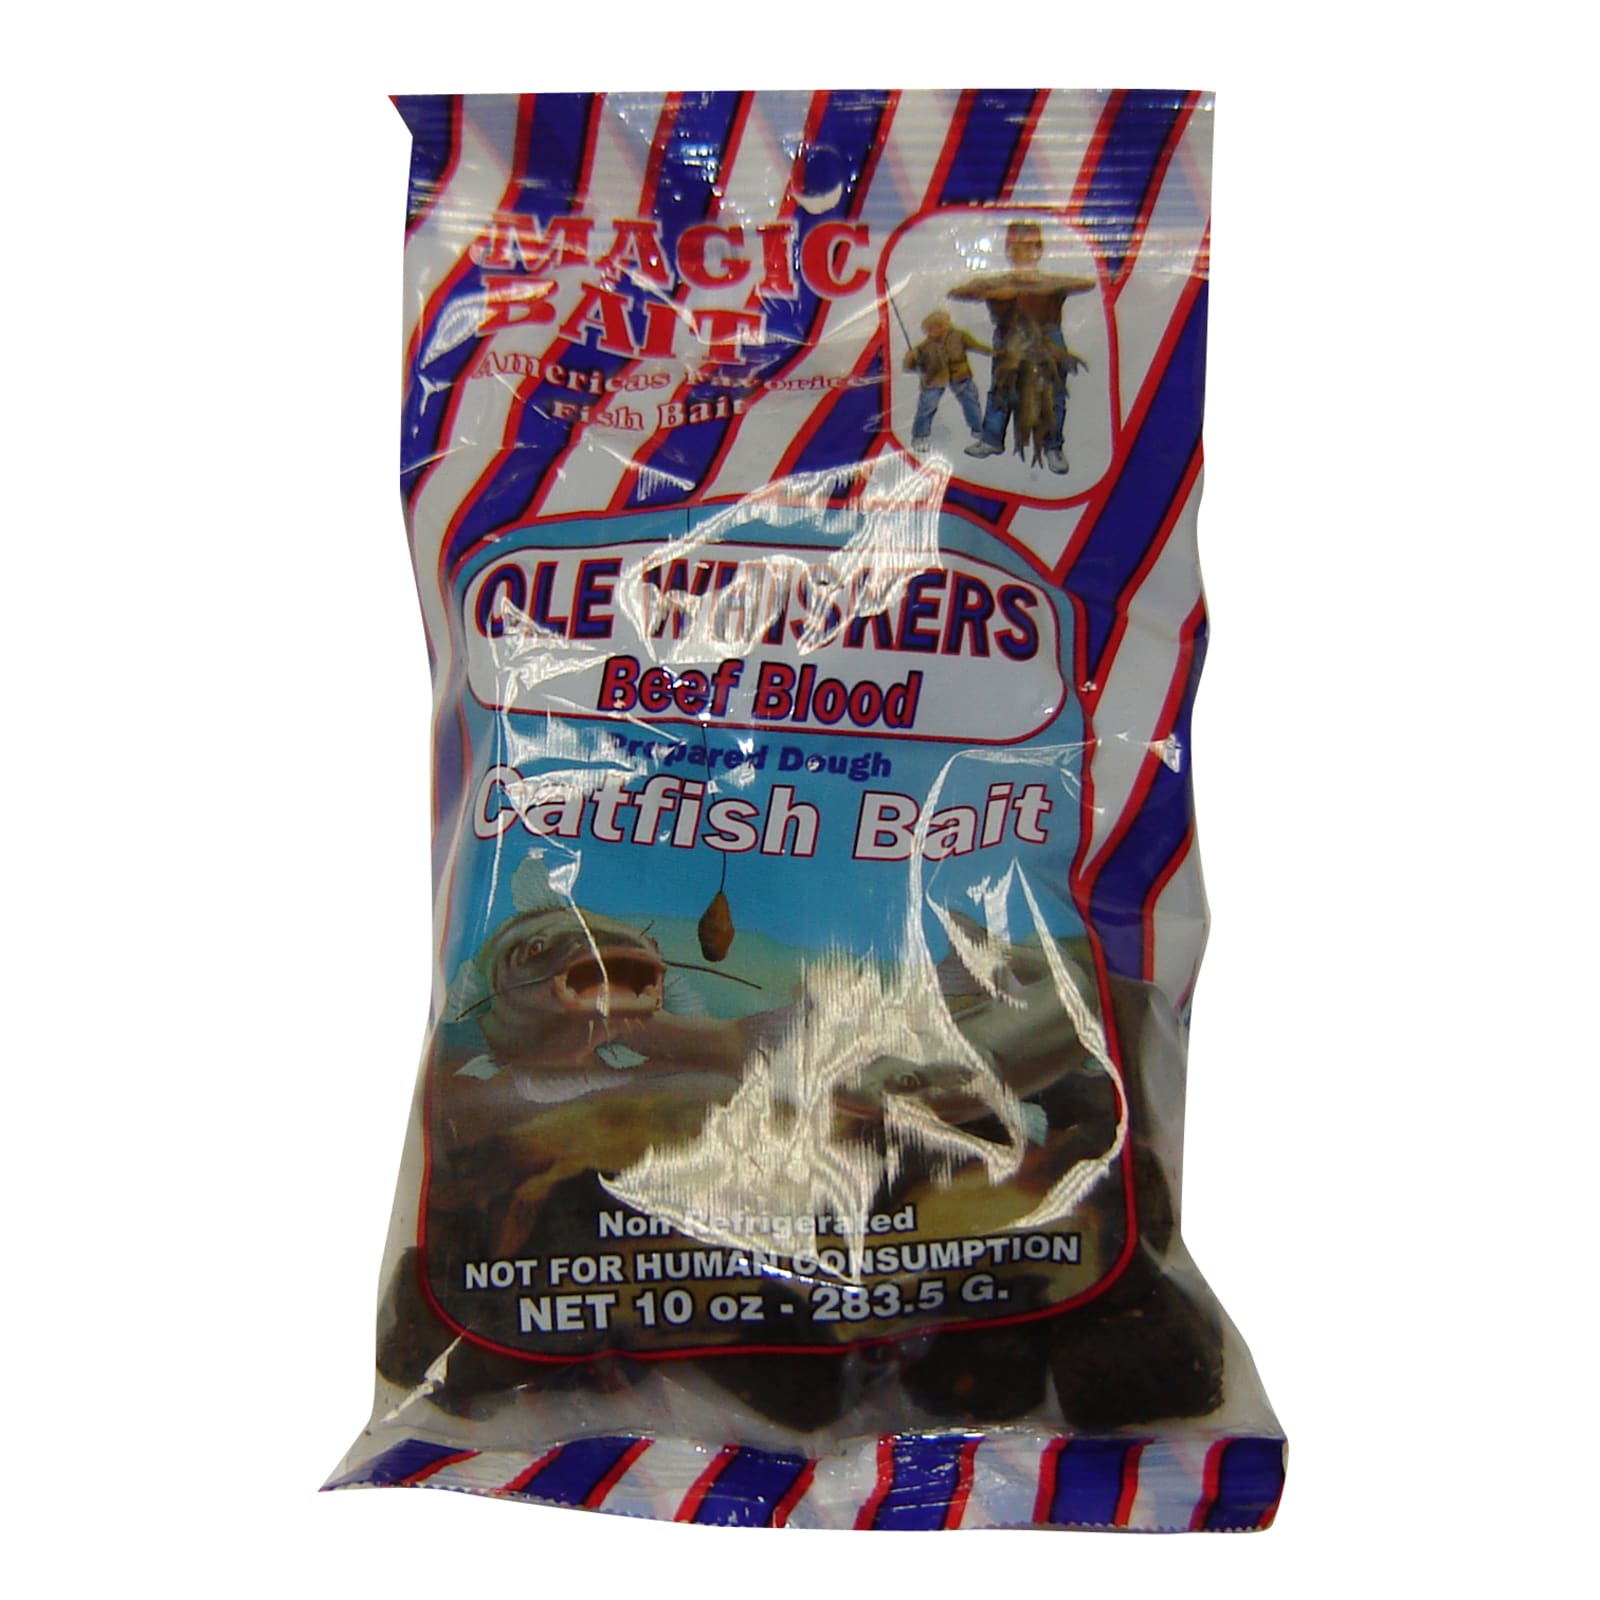 Cubed Catfish Bait - Ole Whiskers Beef Blood by Magic Bait at